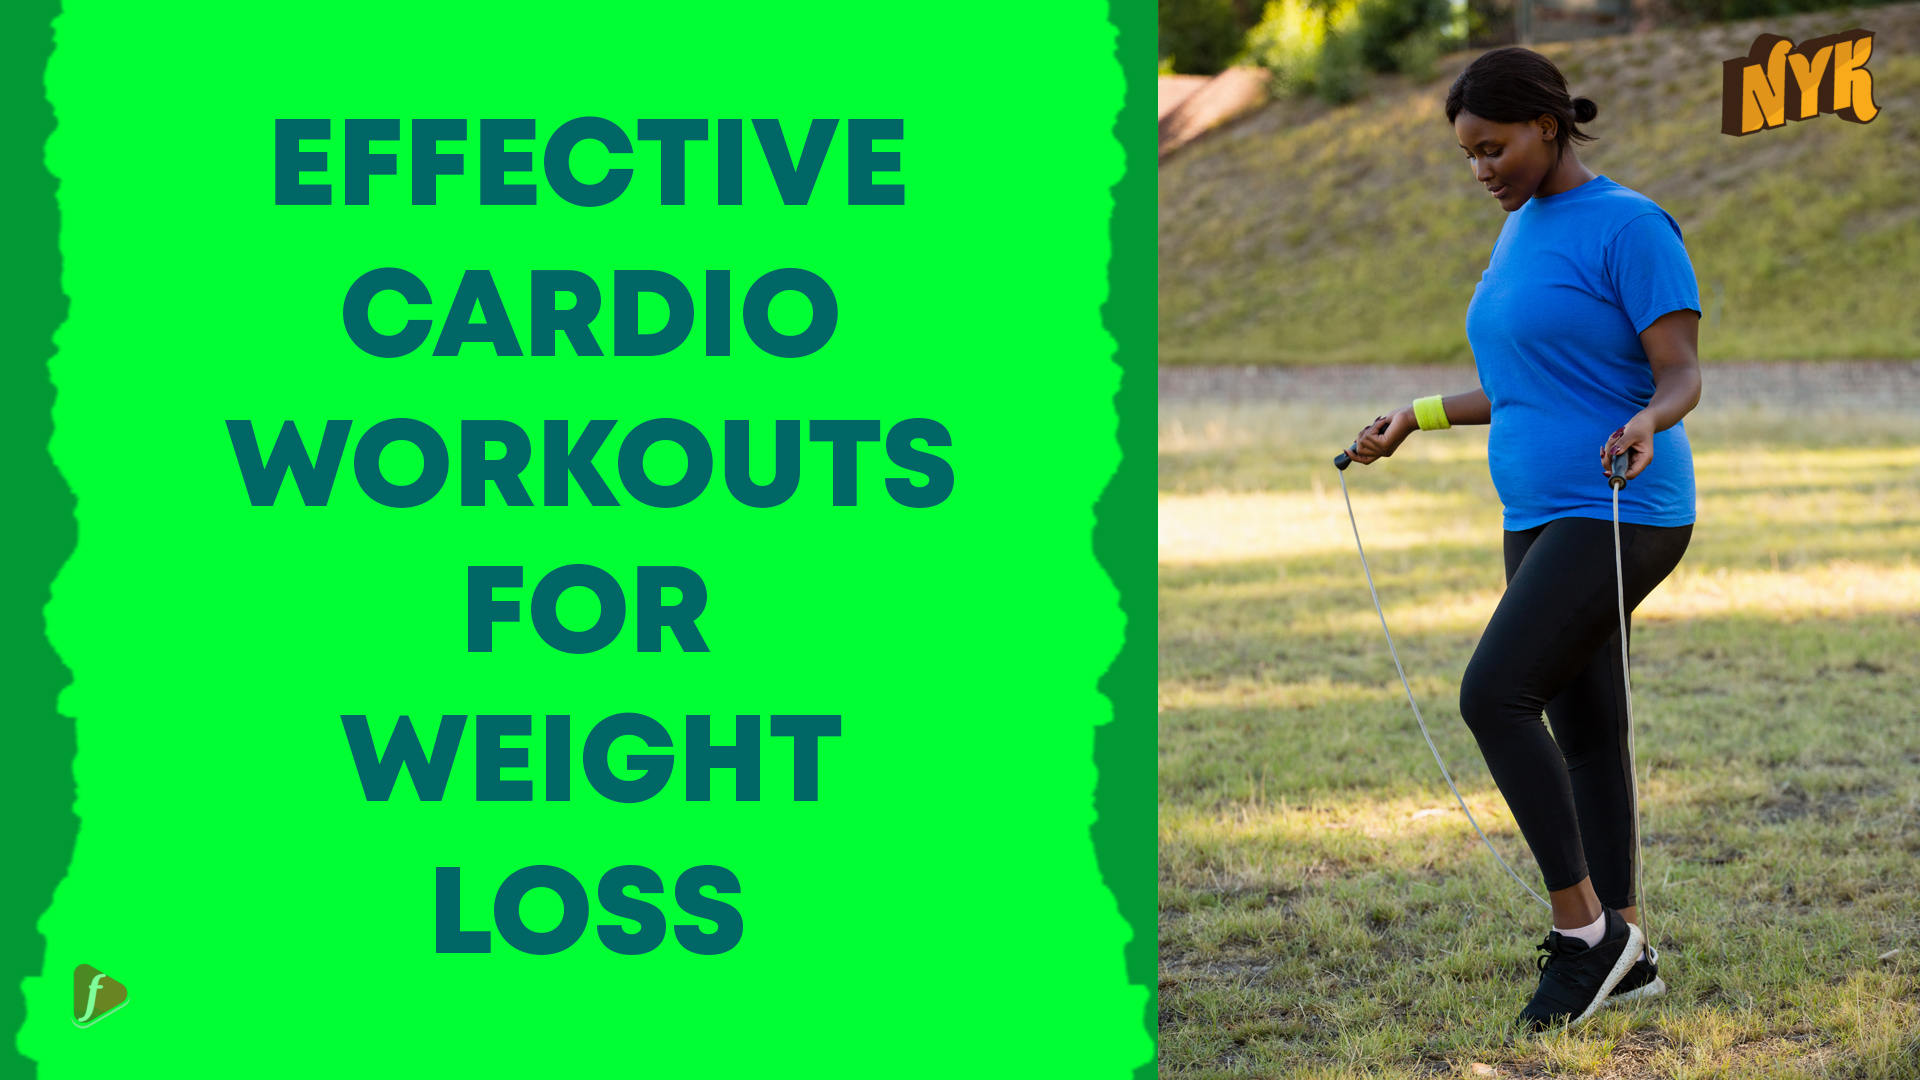 Top 4 Best Cardio Workouts For Weight Loss